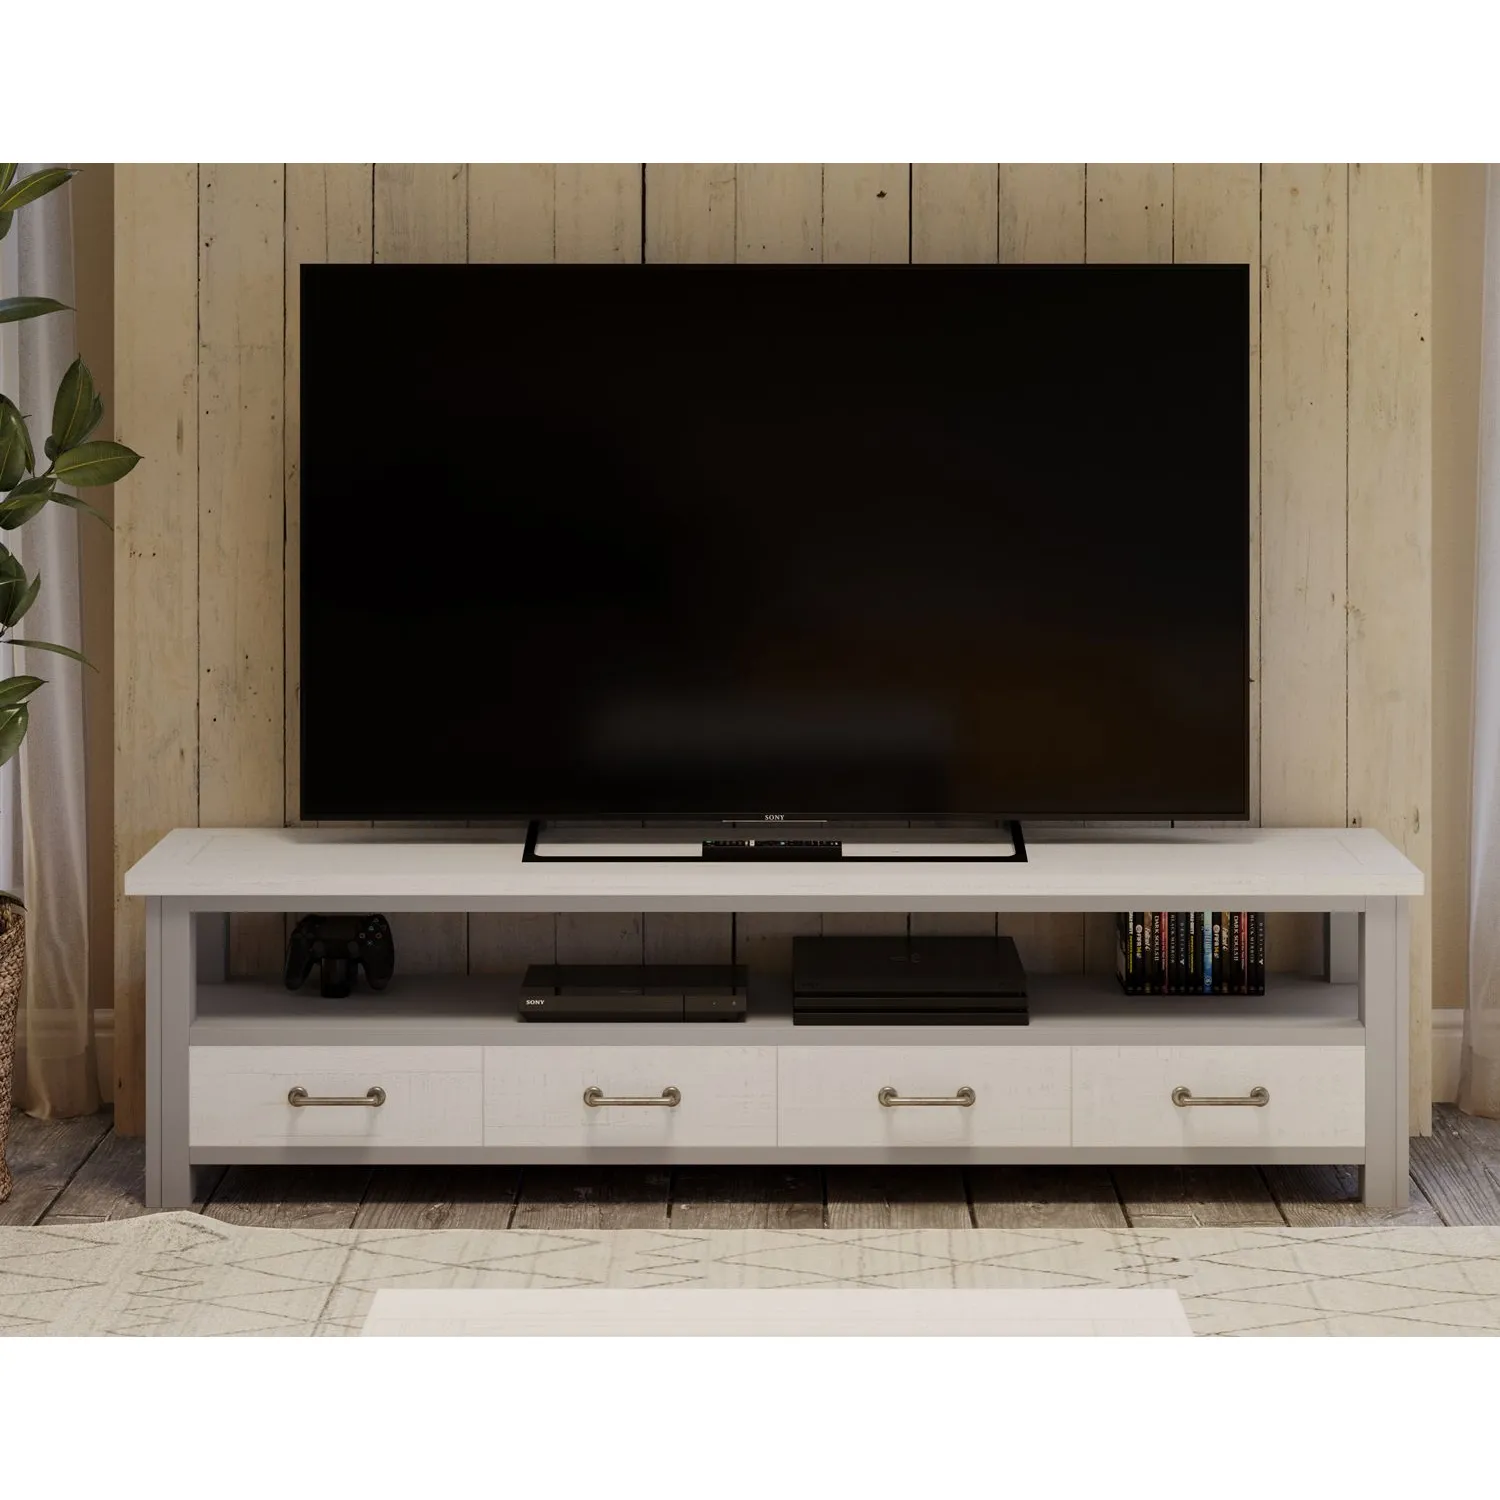 Greystone Super Sized Widescreen Television cabinet